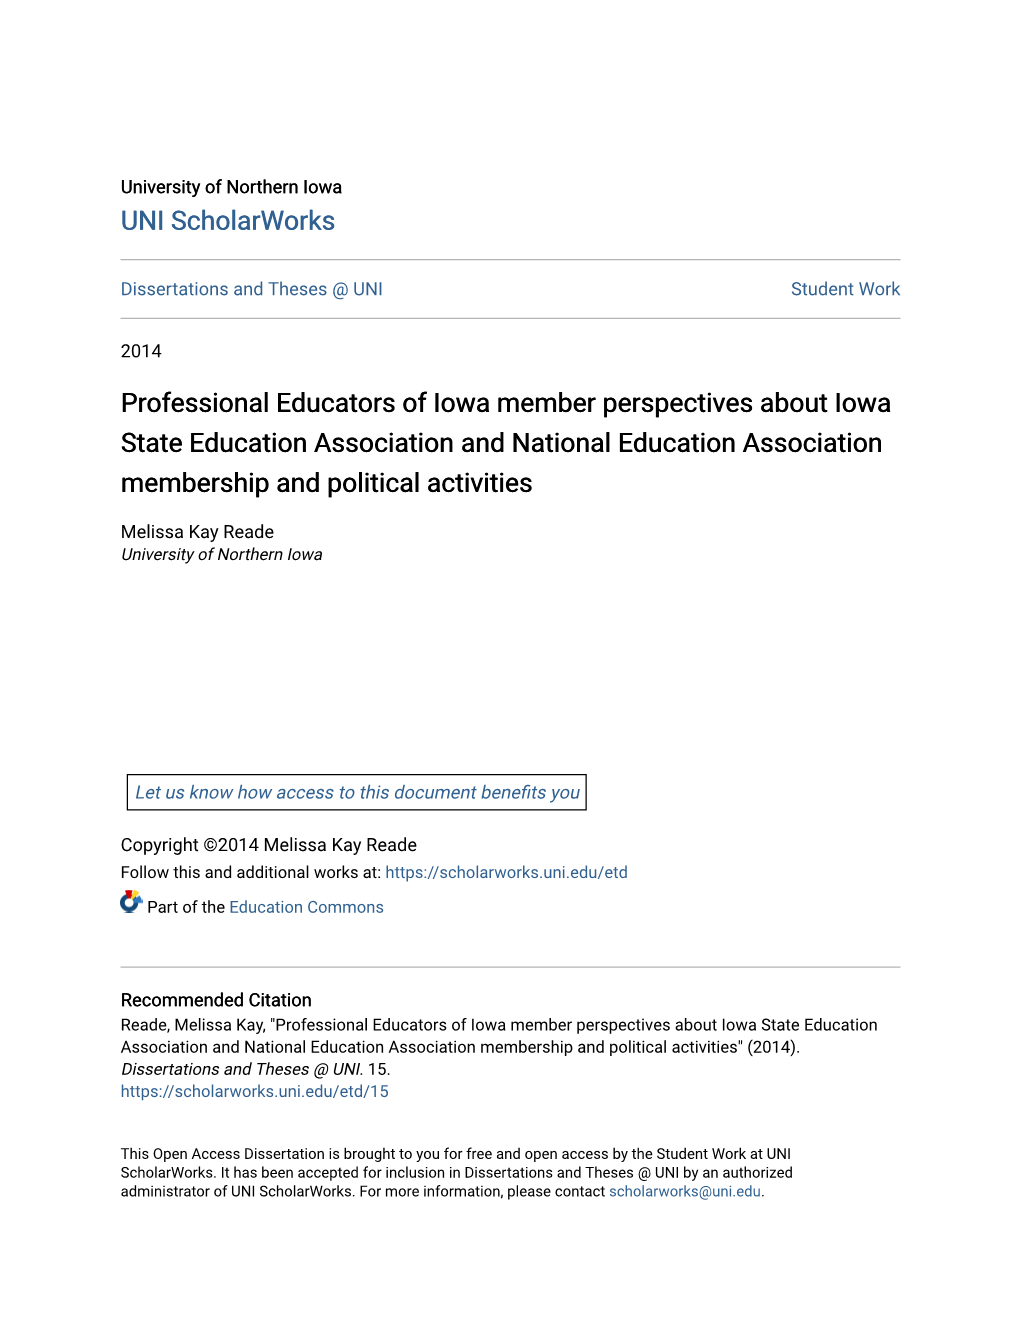 Professional Educators of Iowa Member Perspectives About Iowa State Education Association and National Education Association Membership and Political Activities